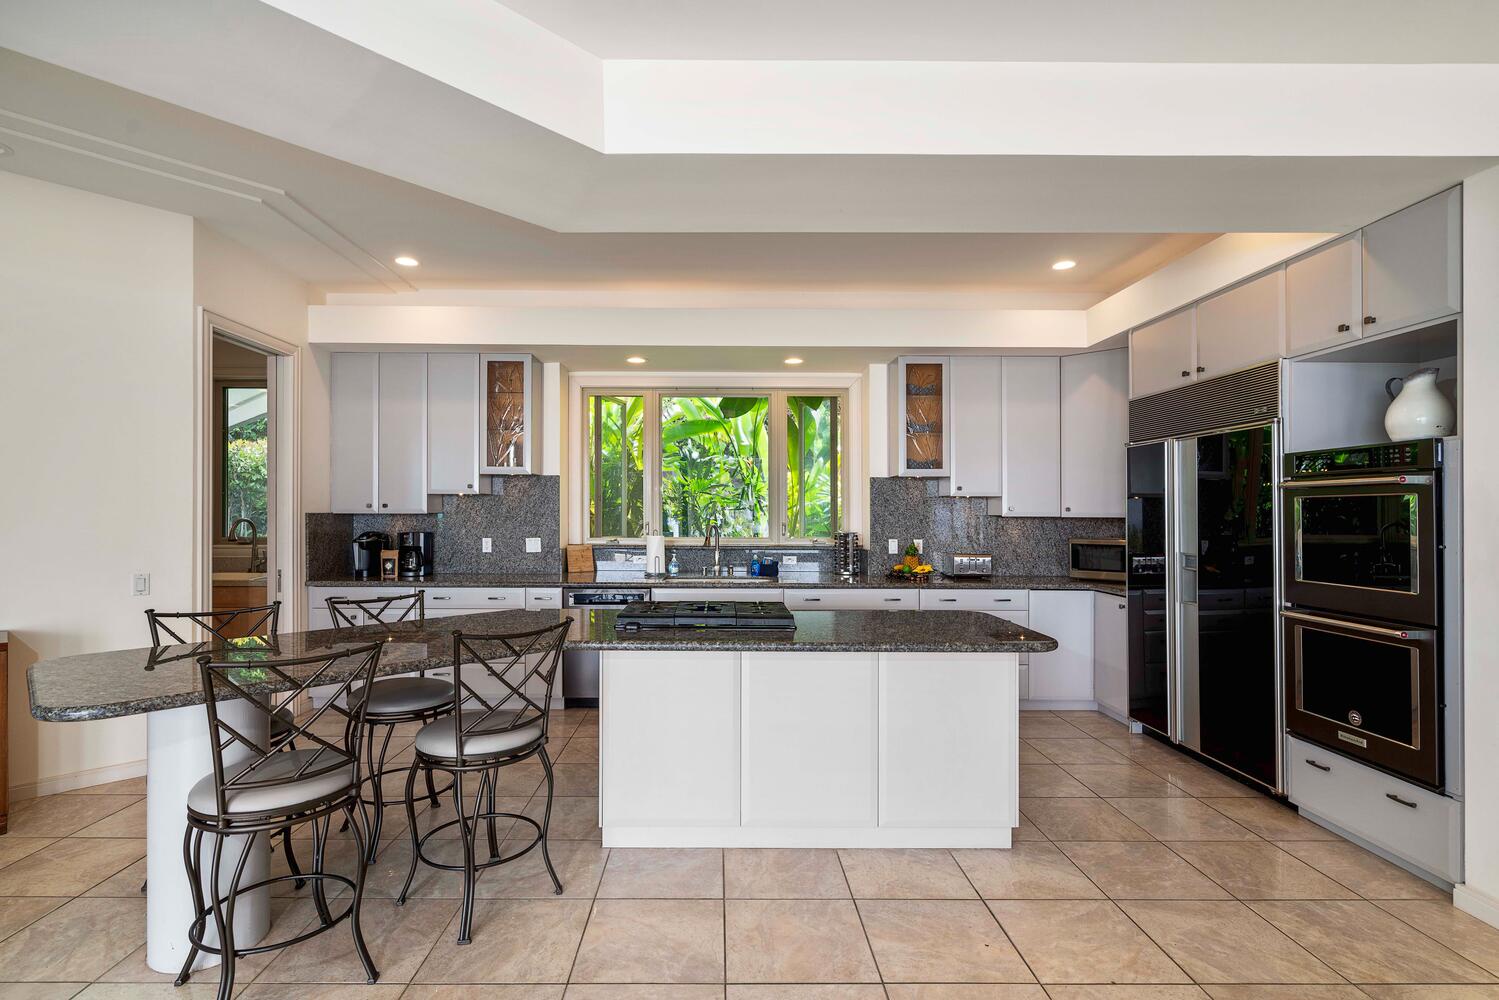 Kailua Kona Vacation Rentals, Blue Hawaii - Large kitchen with great flow for meal preparation!